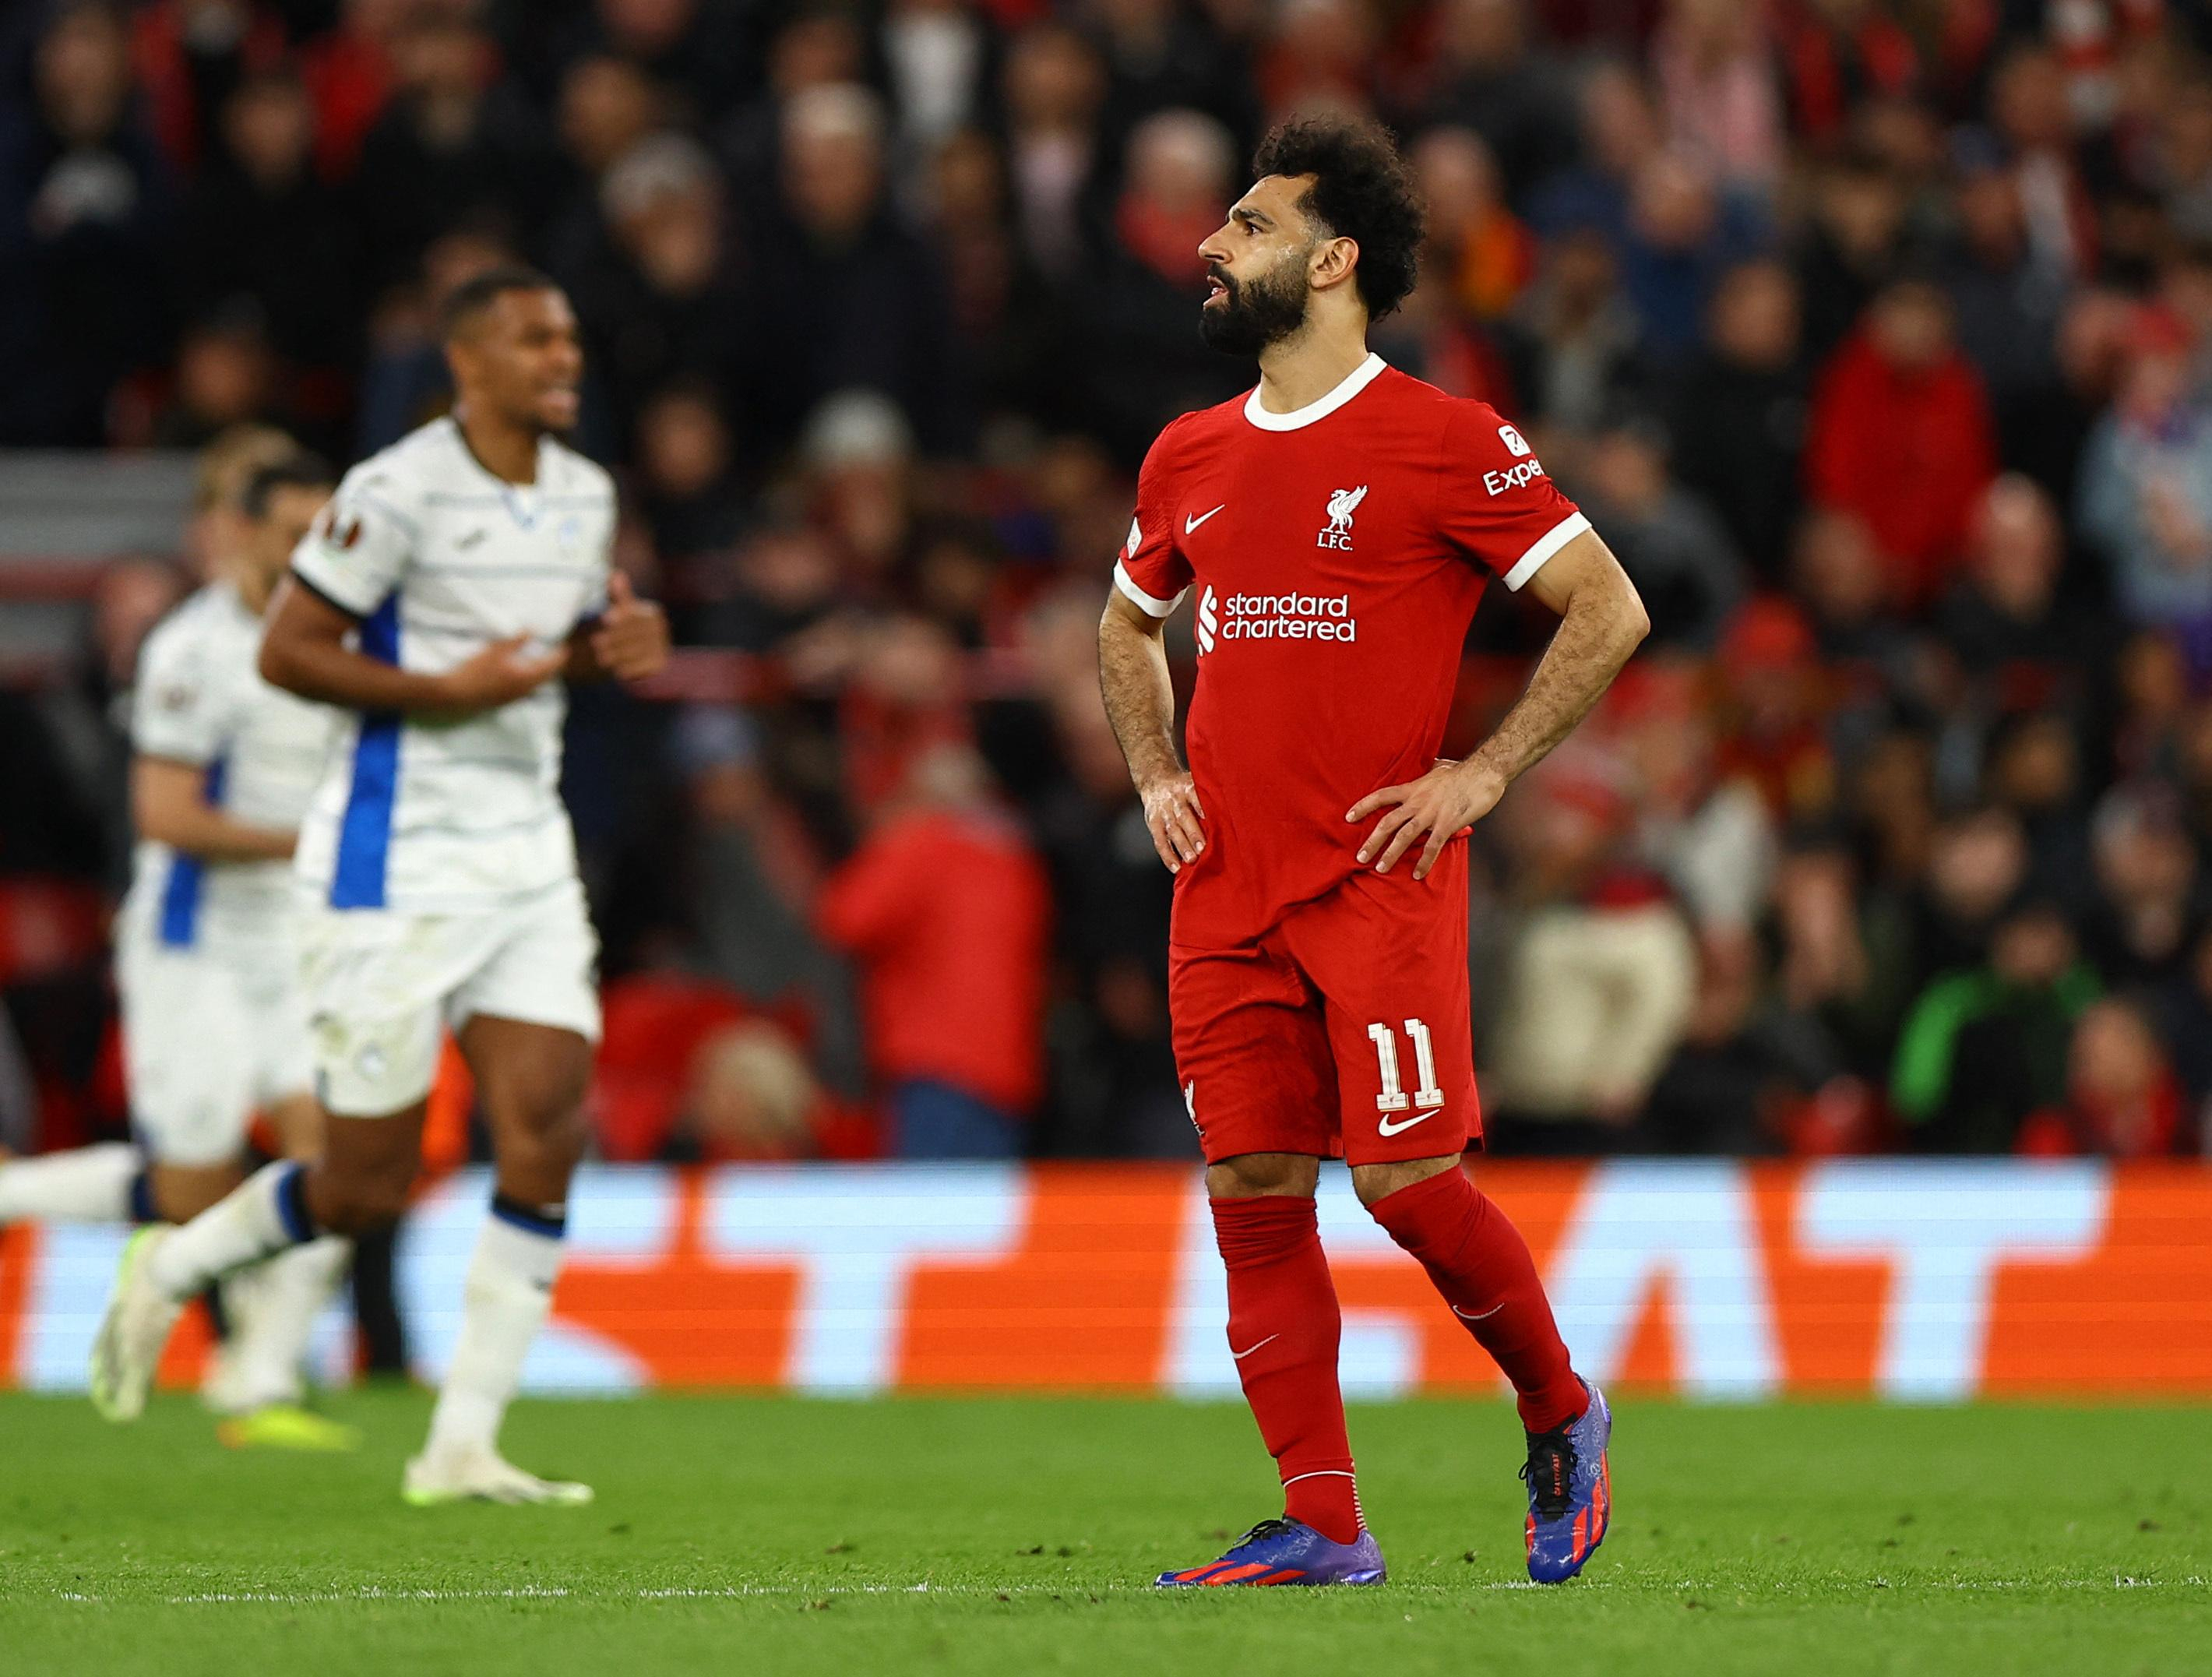 Europa League: Liverpool crushed at Anfield by Atalanta, Leverkusen knocks out West Ham